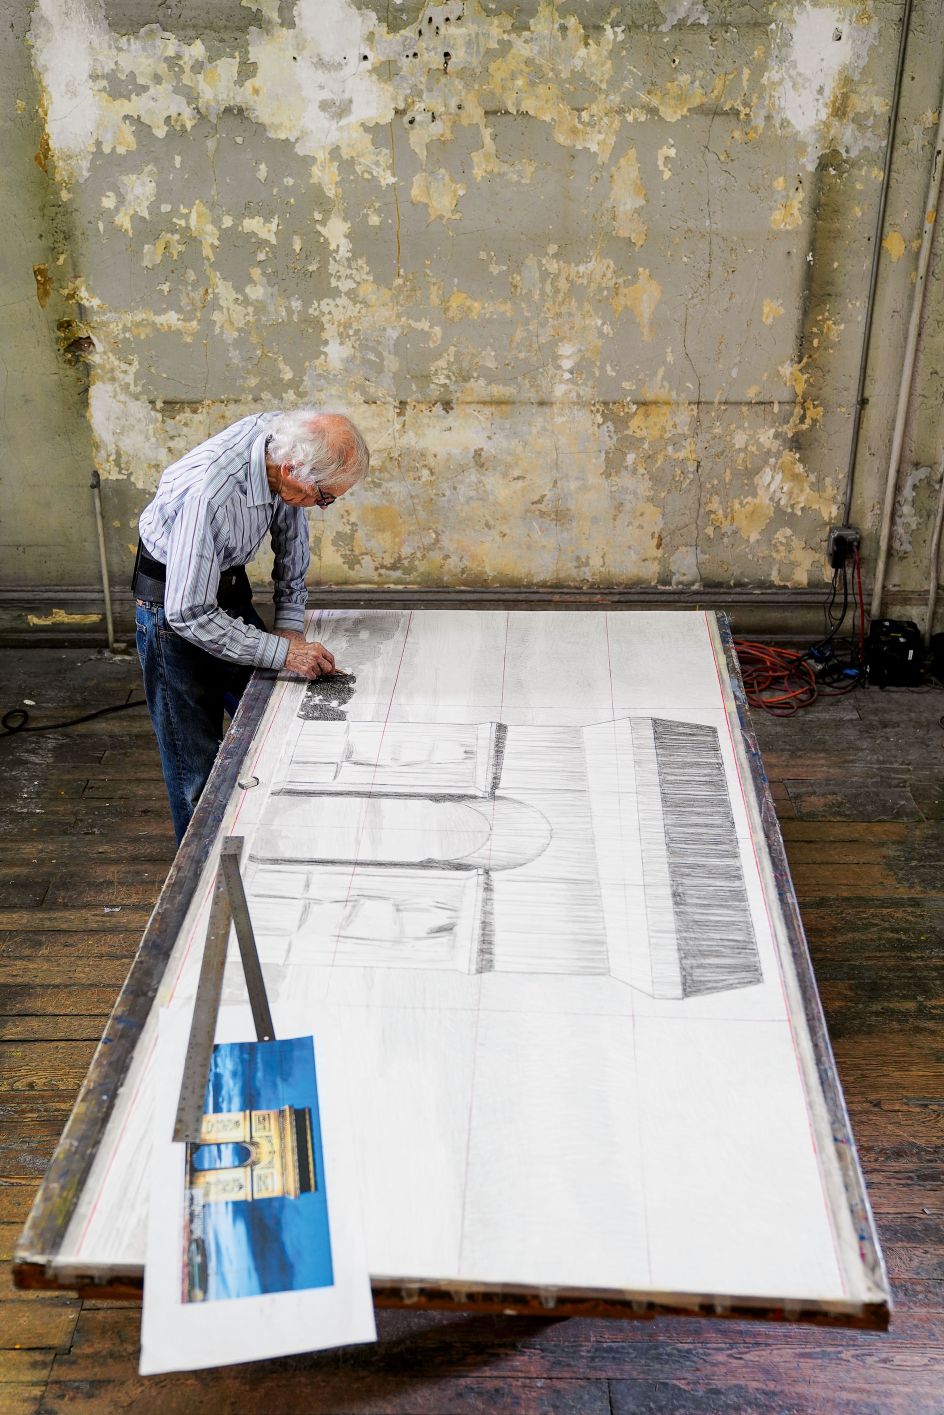 January 2020, New York City, Christo in his studio, working on a large preparatory drawing for the Arc de Triomphe, Wrapped Photo: © Wolfgang Volz